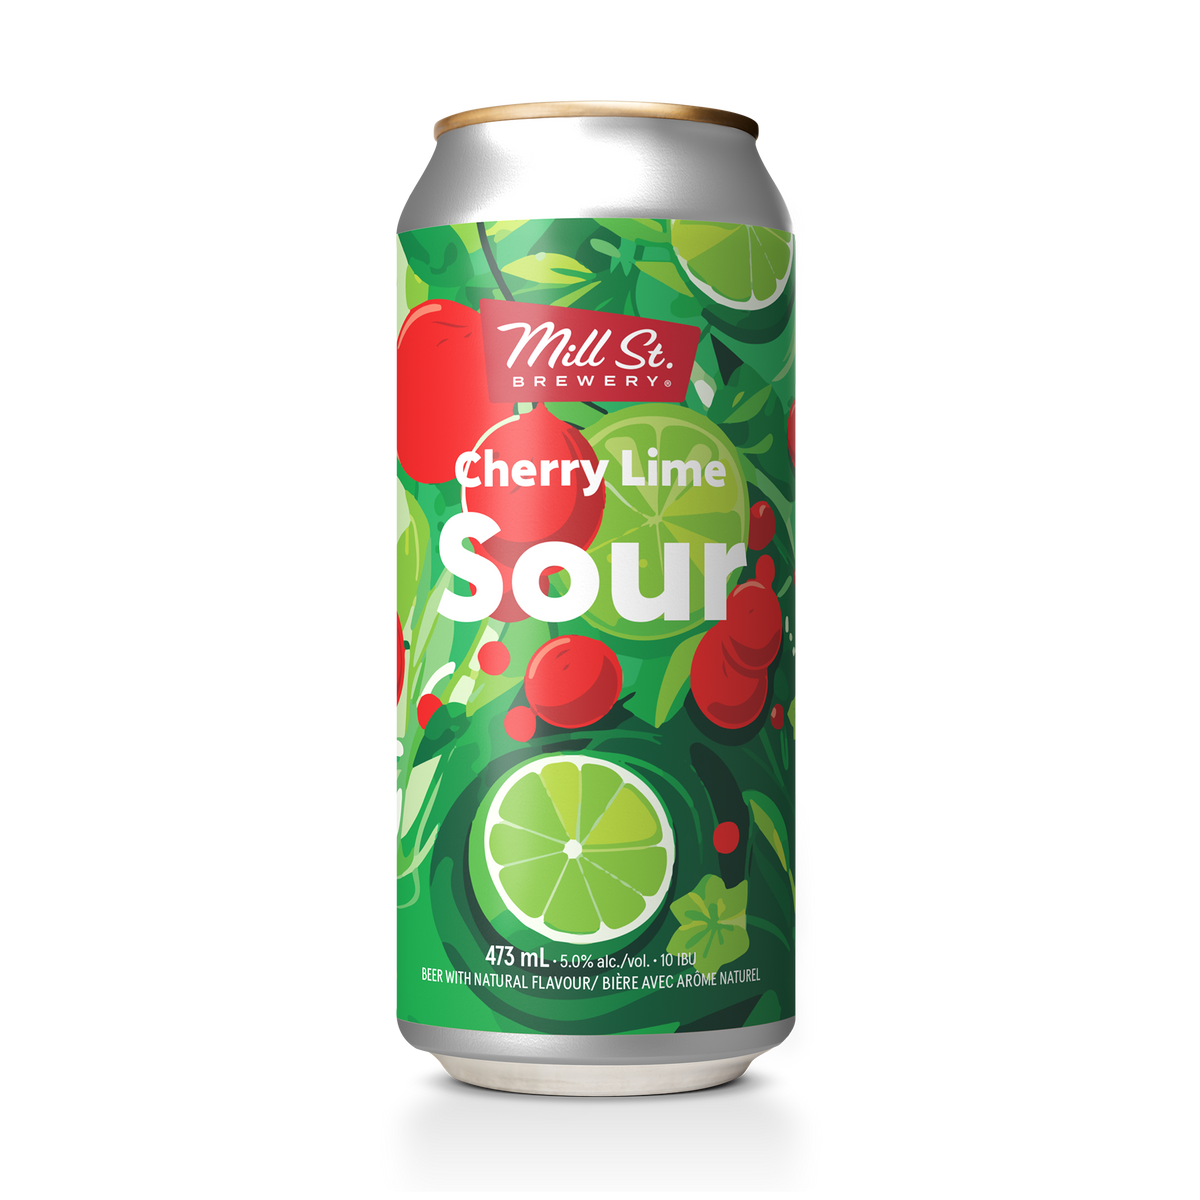 Cherry Lime Sour